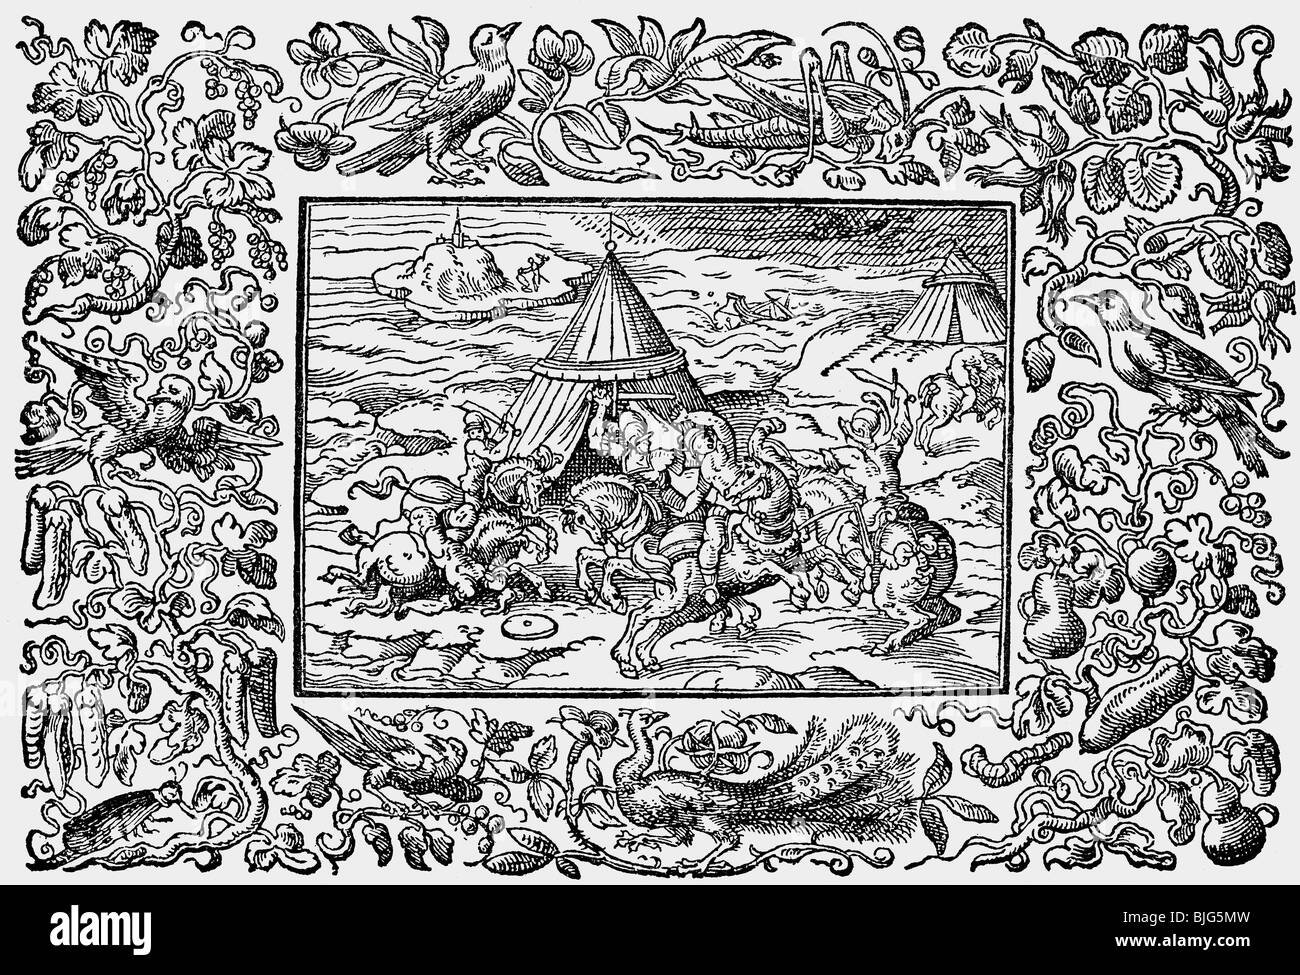 fine arts, Amman, Jost (1539-1591), woodcut, fight scene, from 'Heldenbuch', printed by Sigmund Feyerabend, Frankfurt on the Main, Germany, 1590, facsimile from 'Der Formenschatz' (Art Treasure) published by Georg Hirth, 1884, Artist's Copyright has not to be cleared Stock Photo